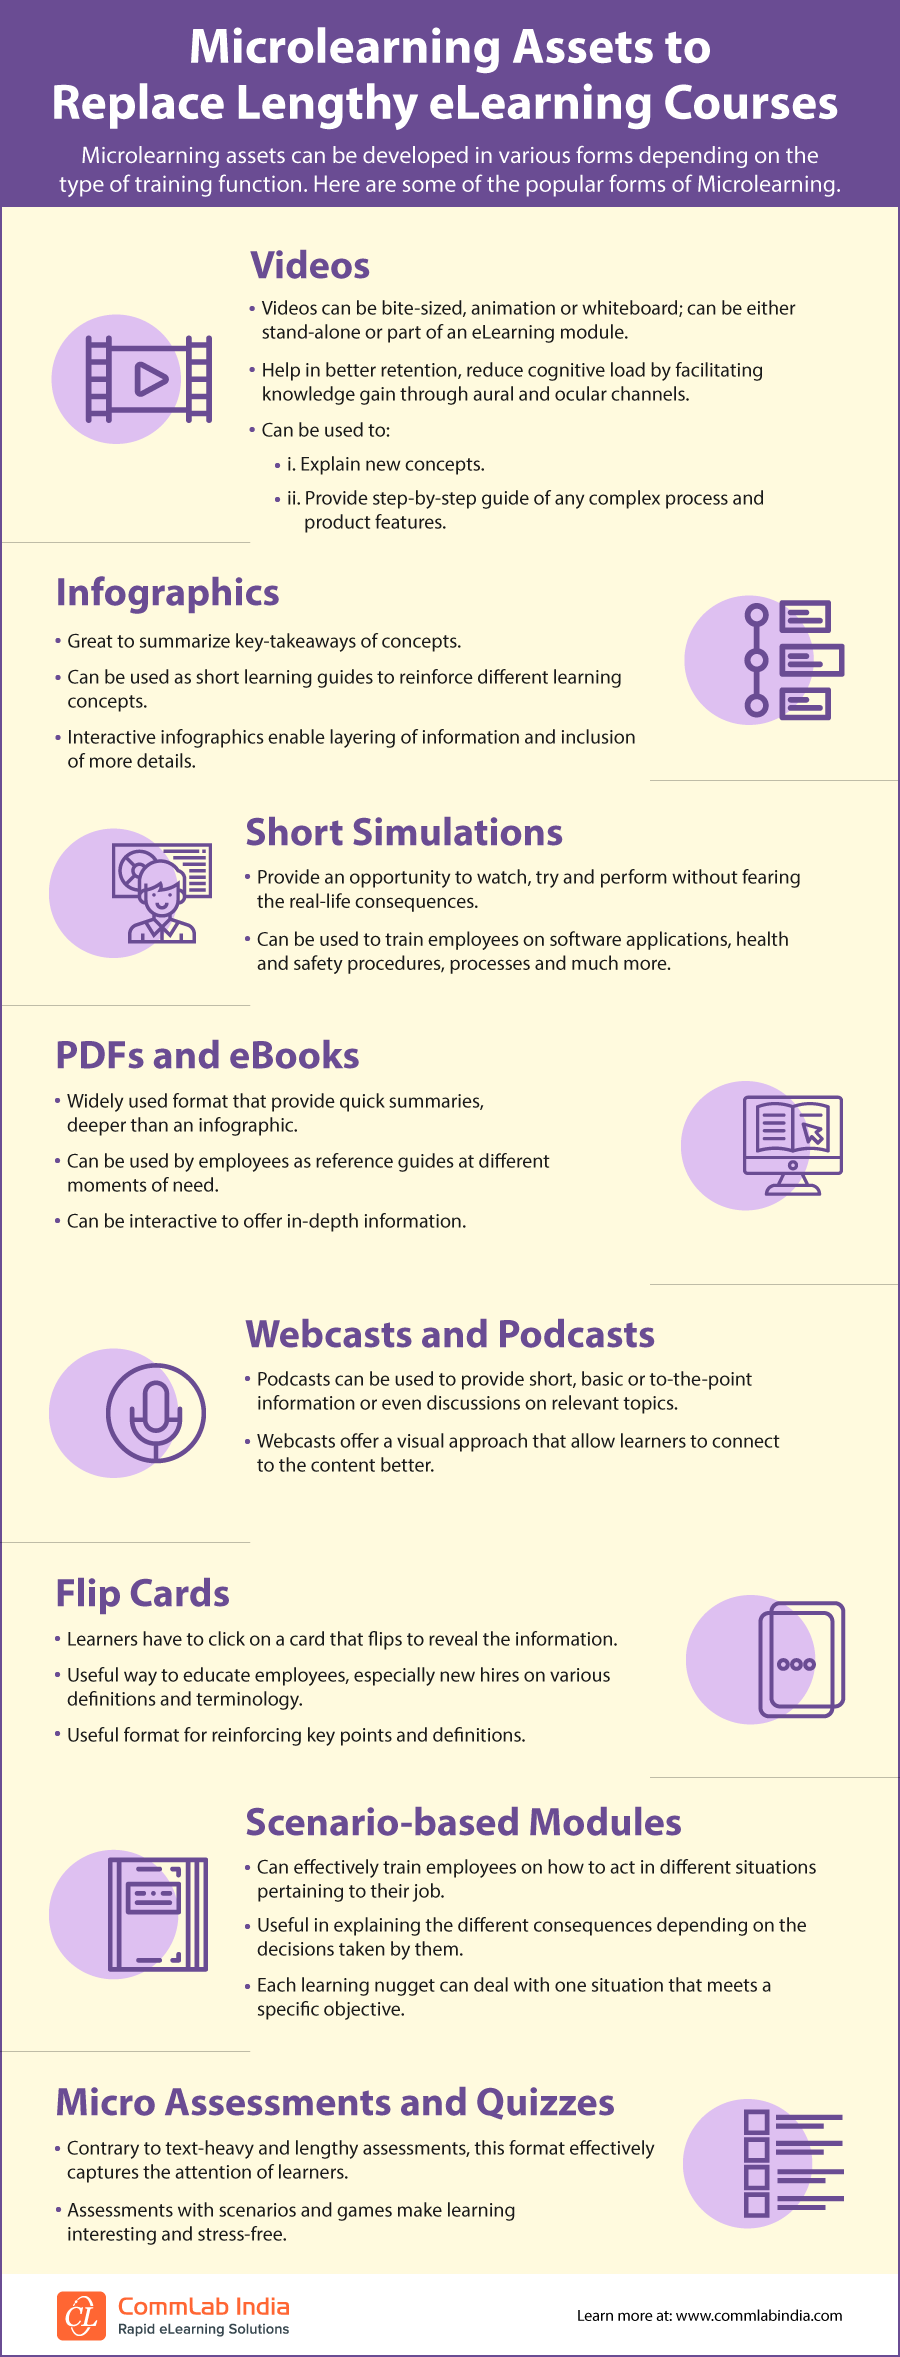 Microlearning Assets to Replace Lengthy eLearning Courses [Infographic]